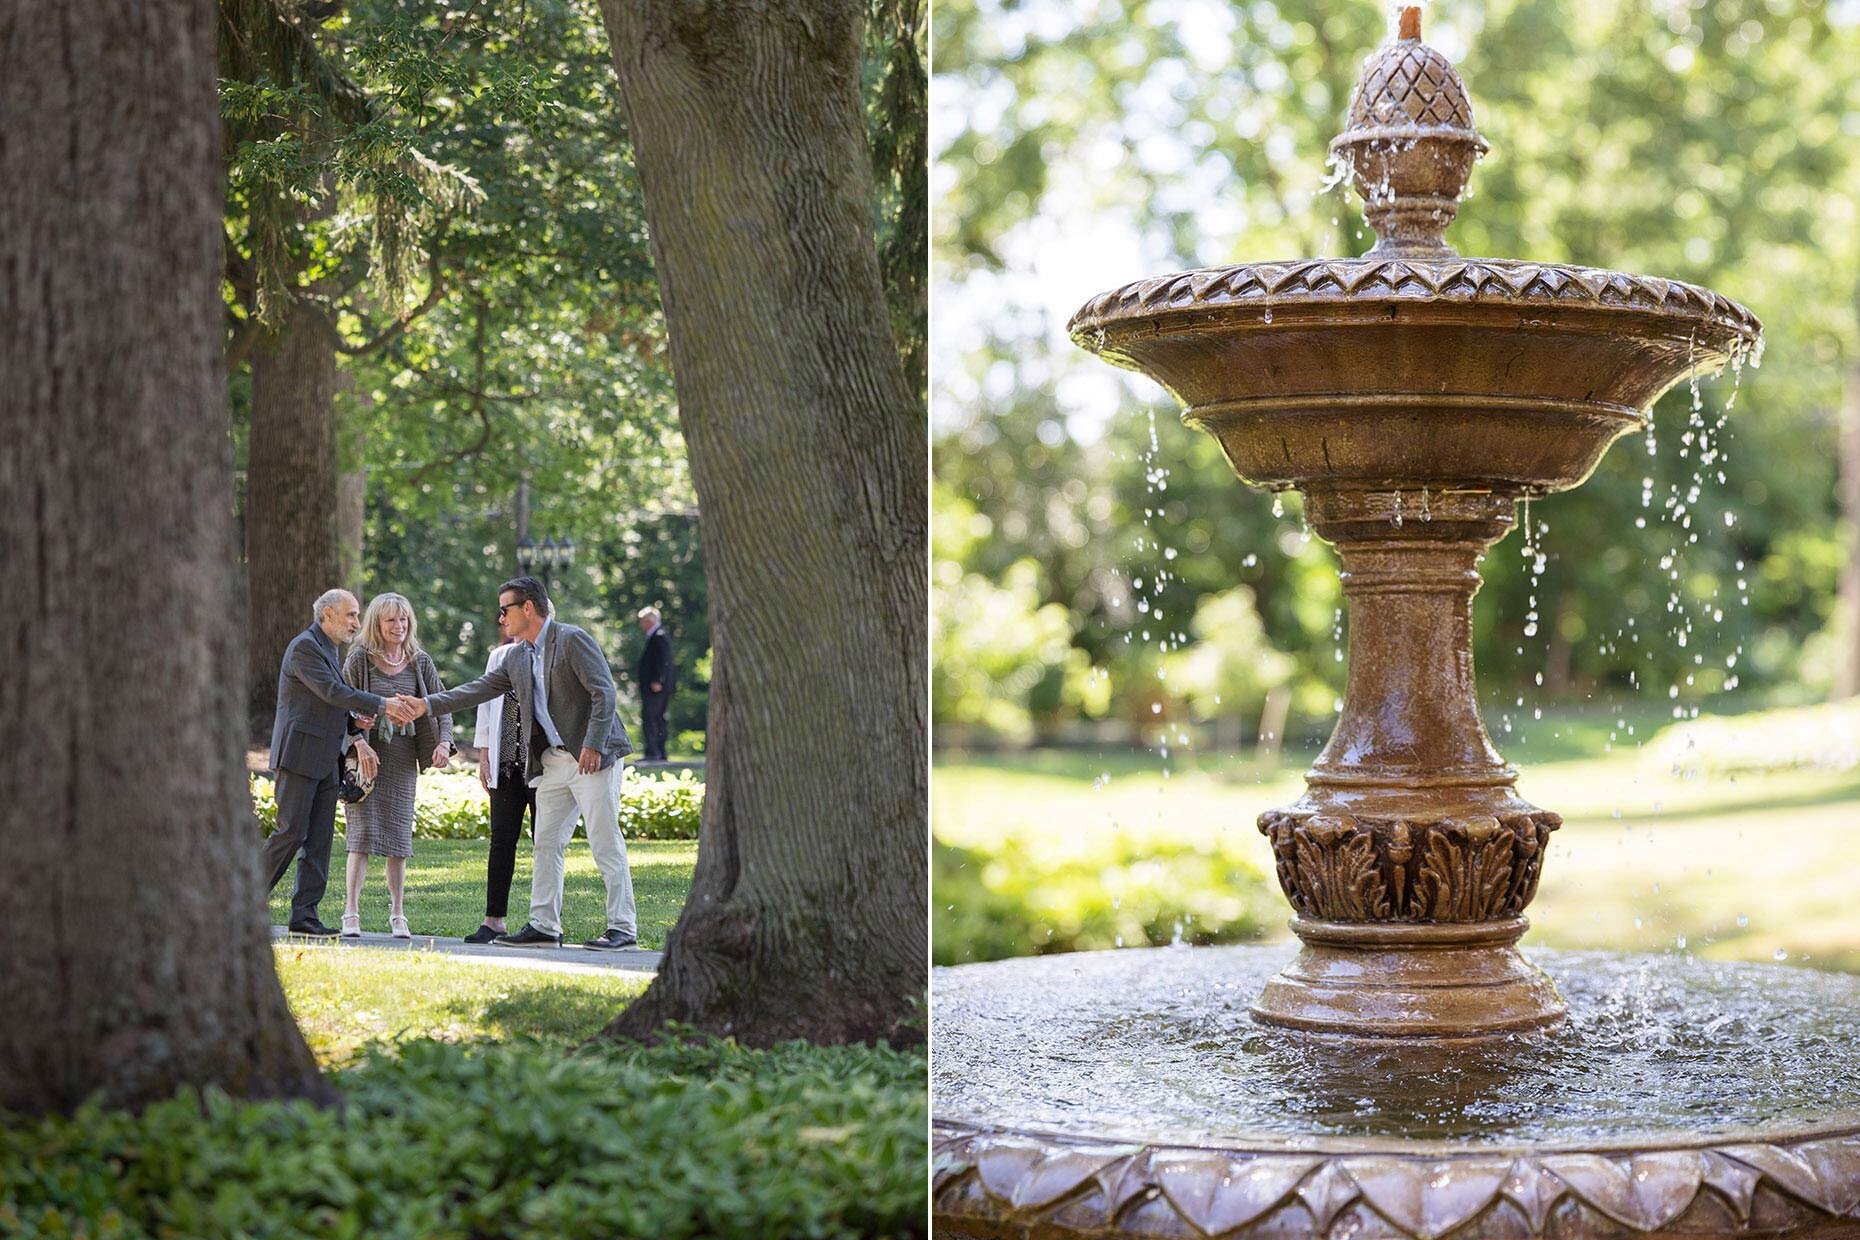 Guests and fountain at Cameron Estate Inn	